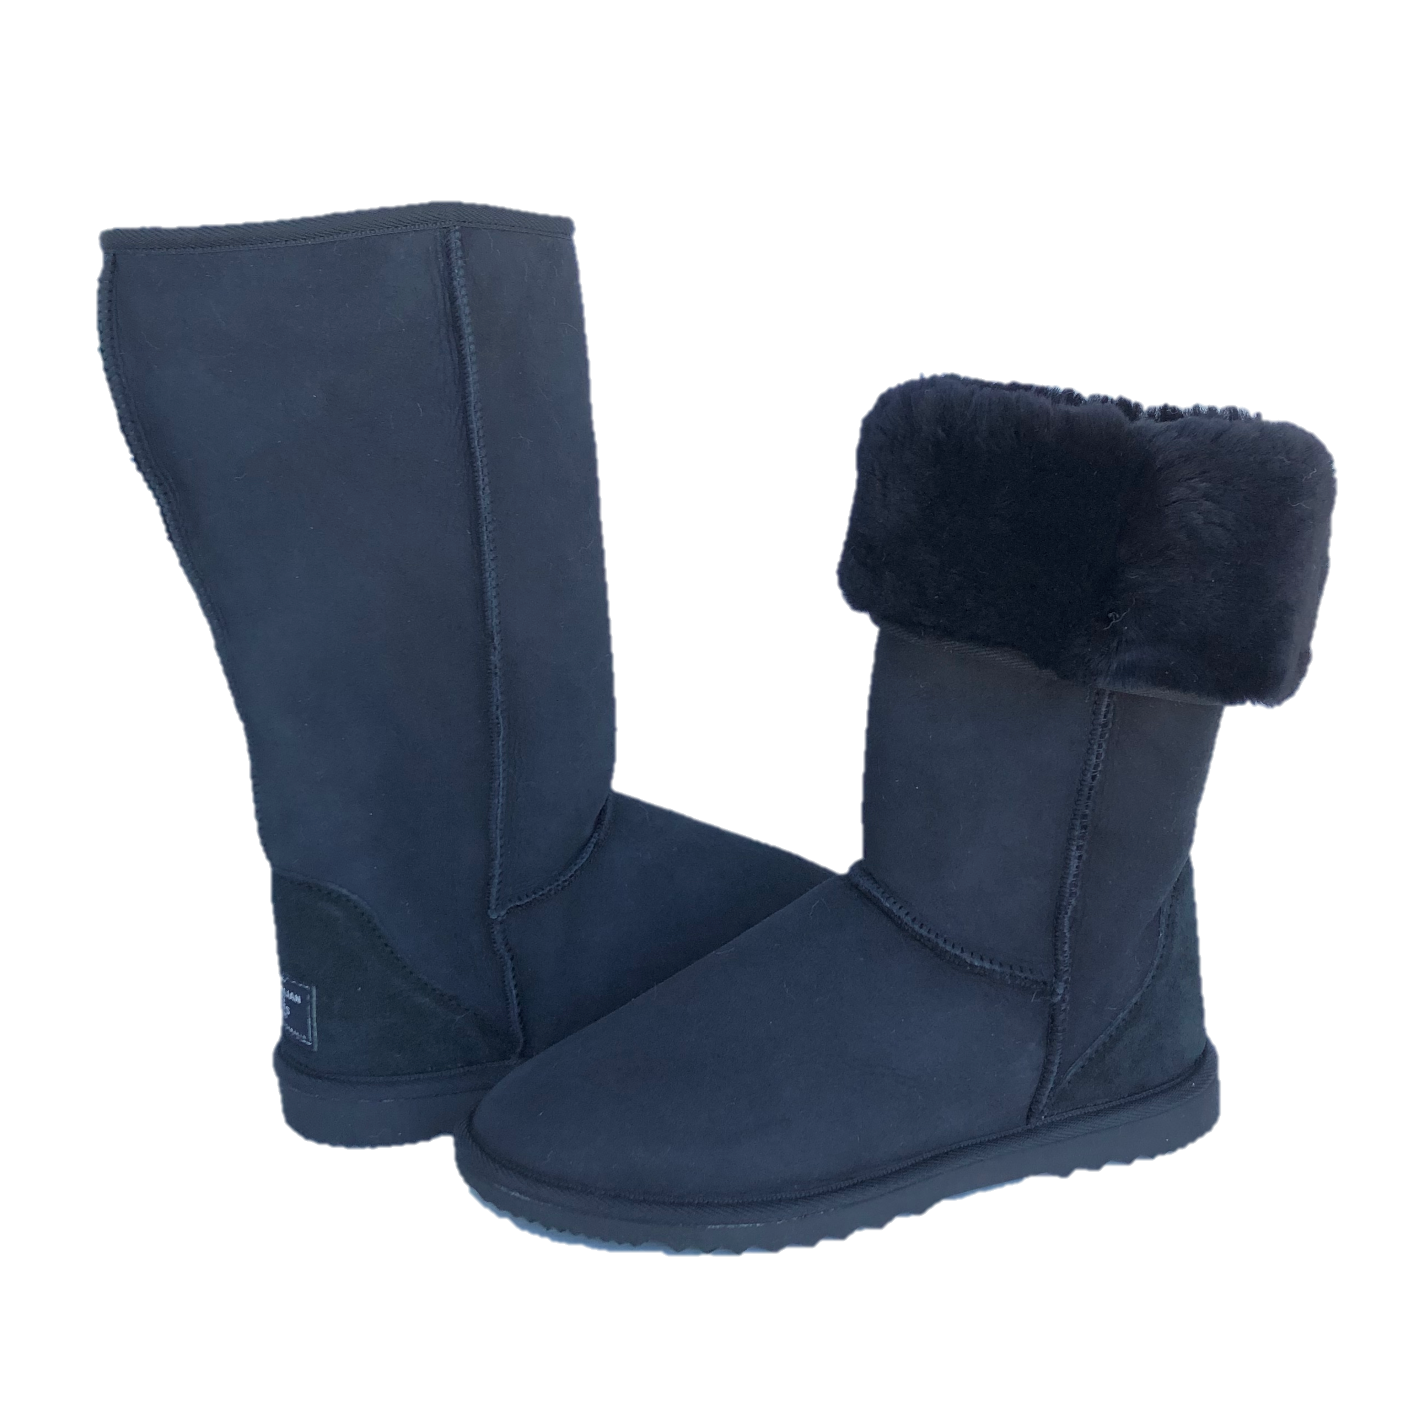 Black tall ugg boots, one boot with sheepskin folded down